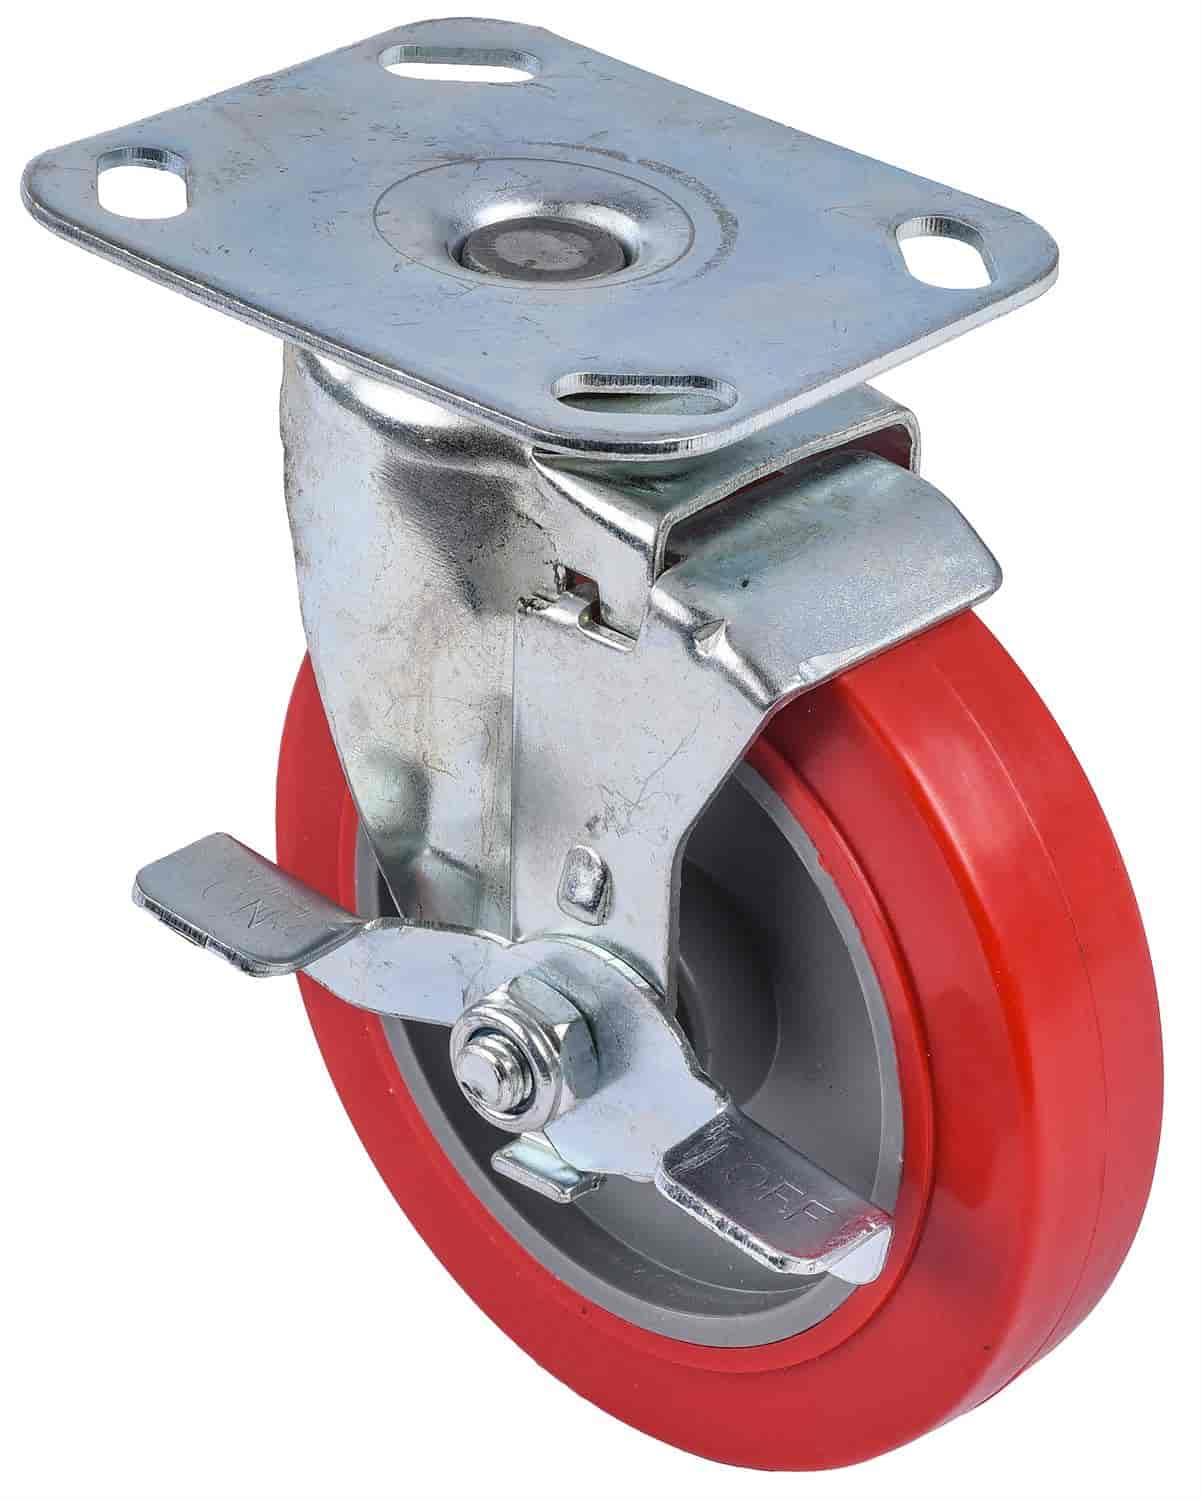 Replacement Swivel Caster for JEGS Hydraulic Lift Cart 555-81426